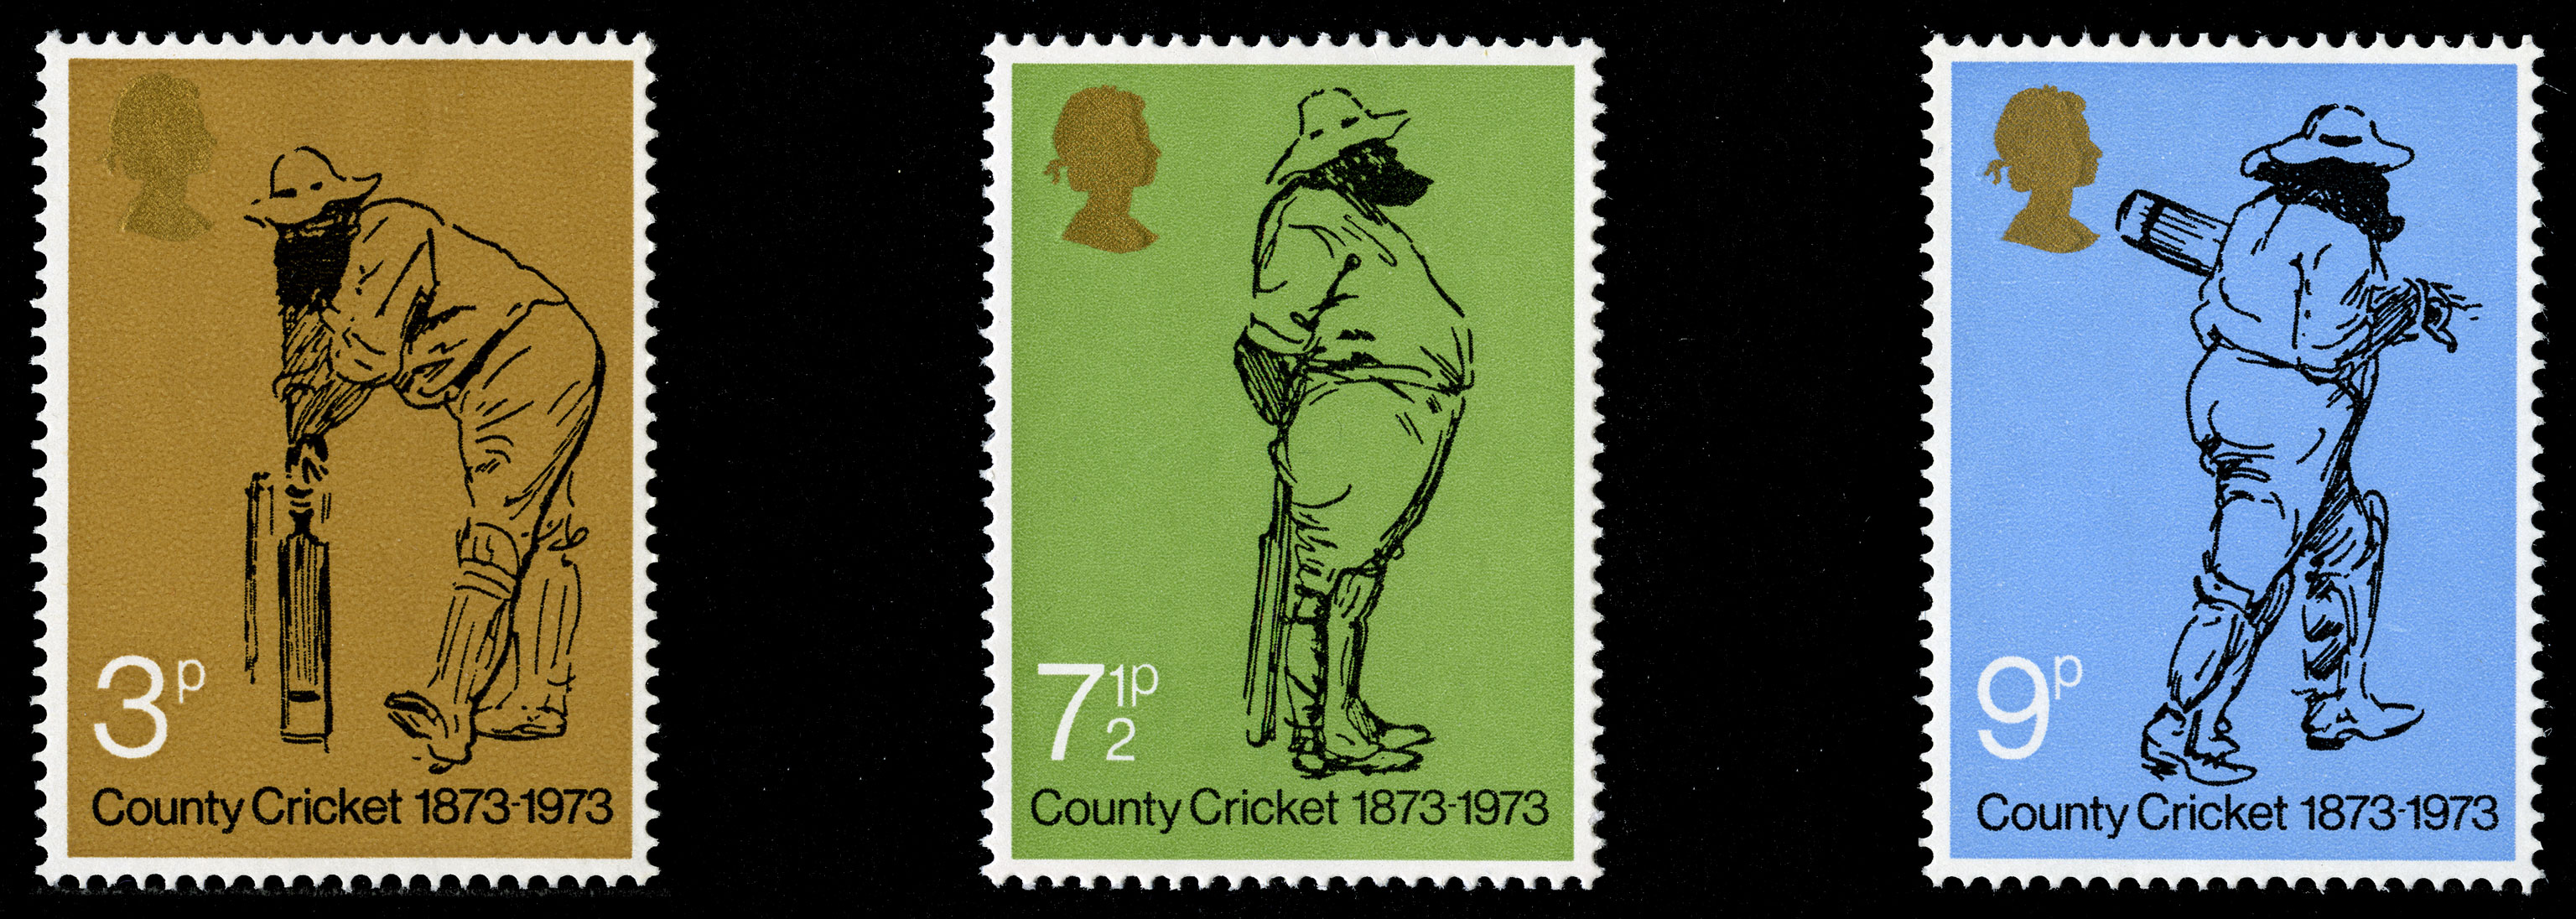 The three issued stamps for the 1973 County Cricket stamp set featuring cartoons of cricketers. 